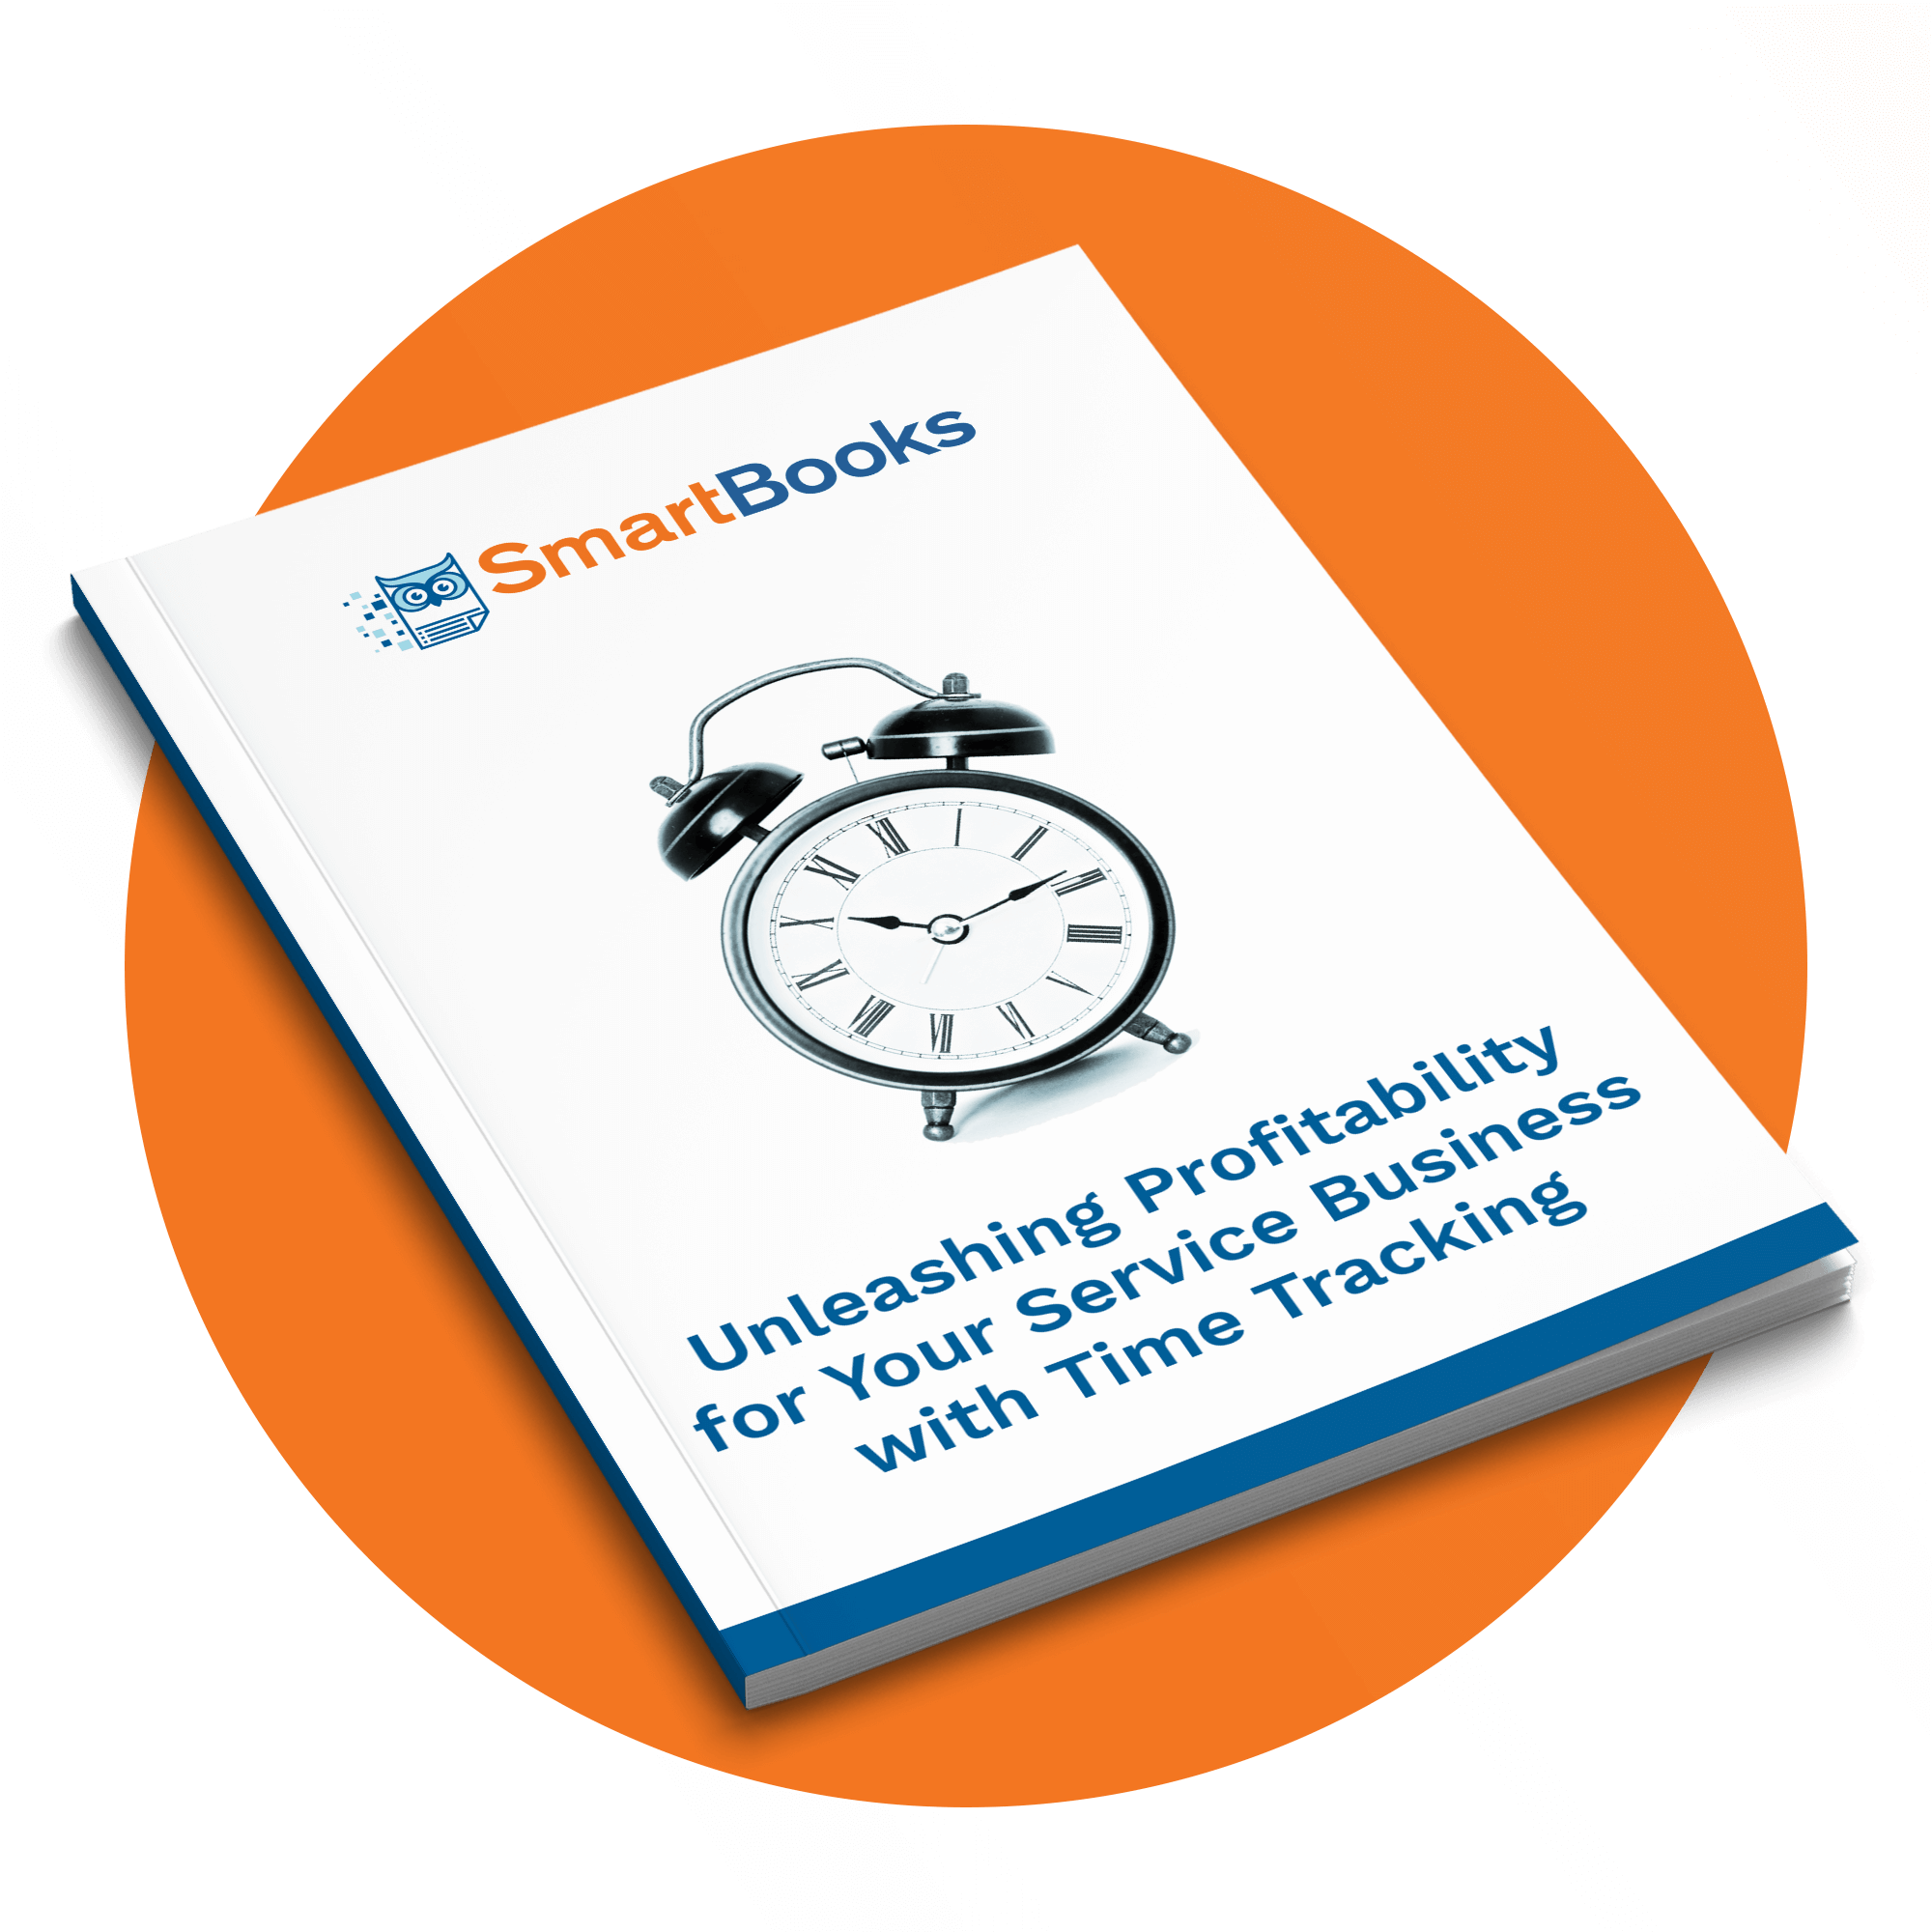 Unleashing Profitability for Your Service Business with Time Tracking